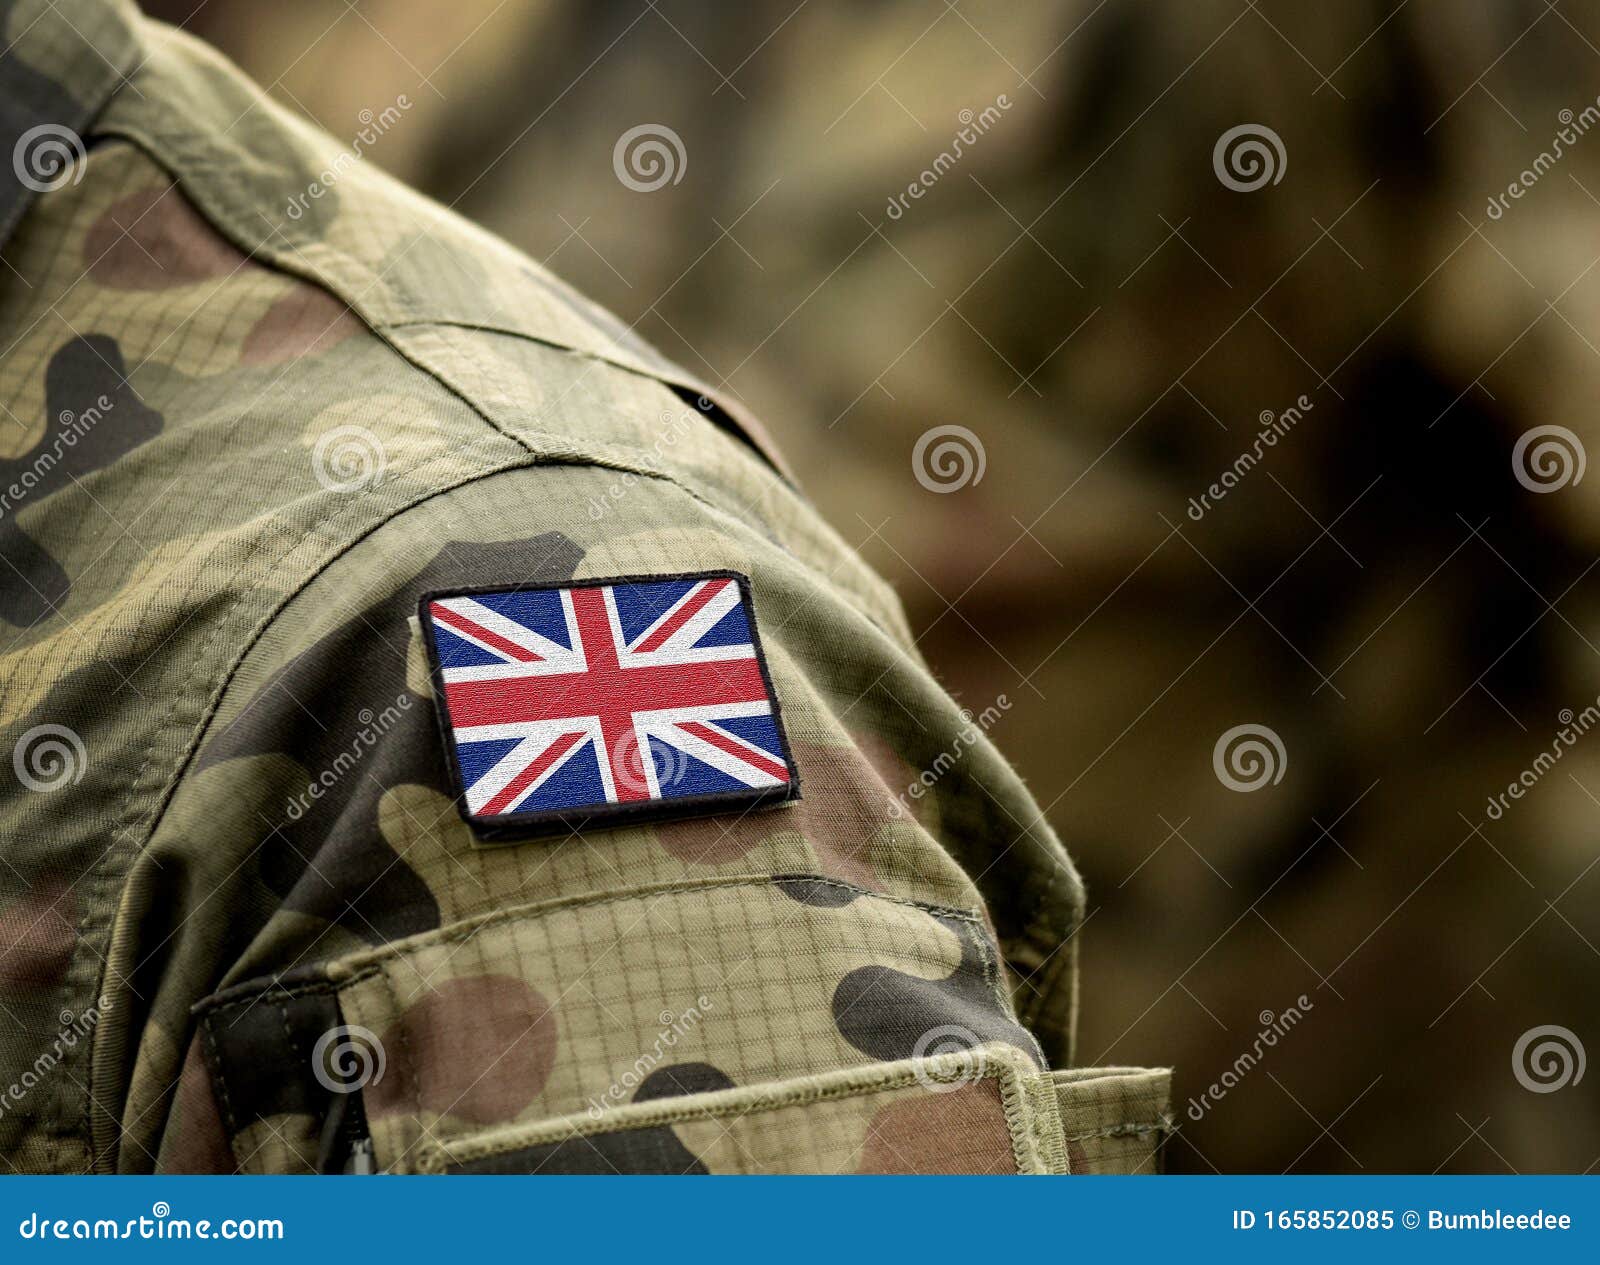 flag of united kingdom on military uniform. uk army. british armed forces, soldiers. collage